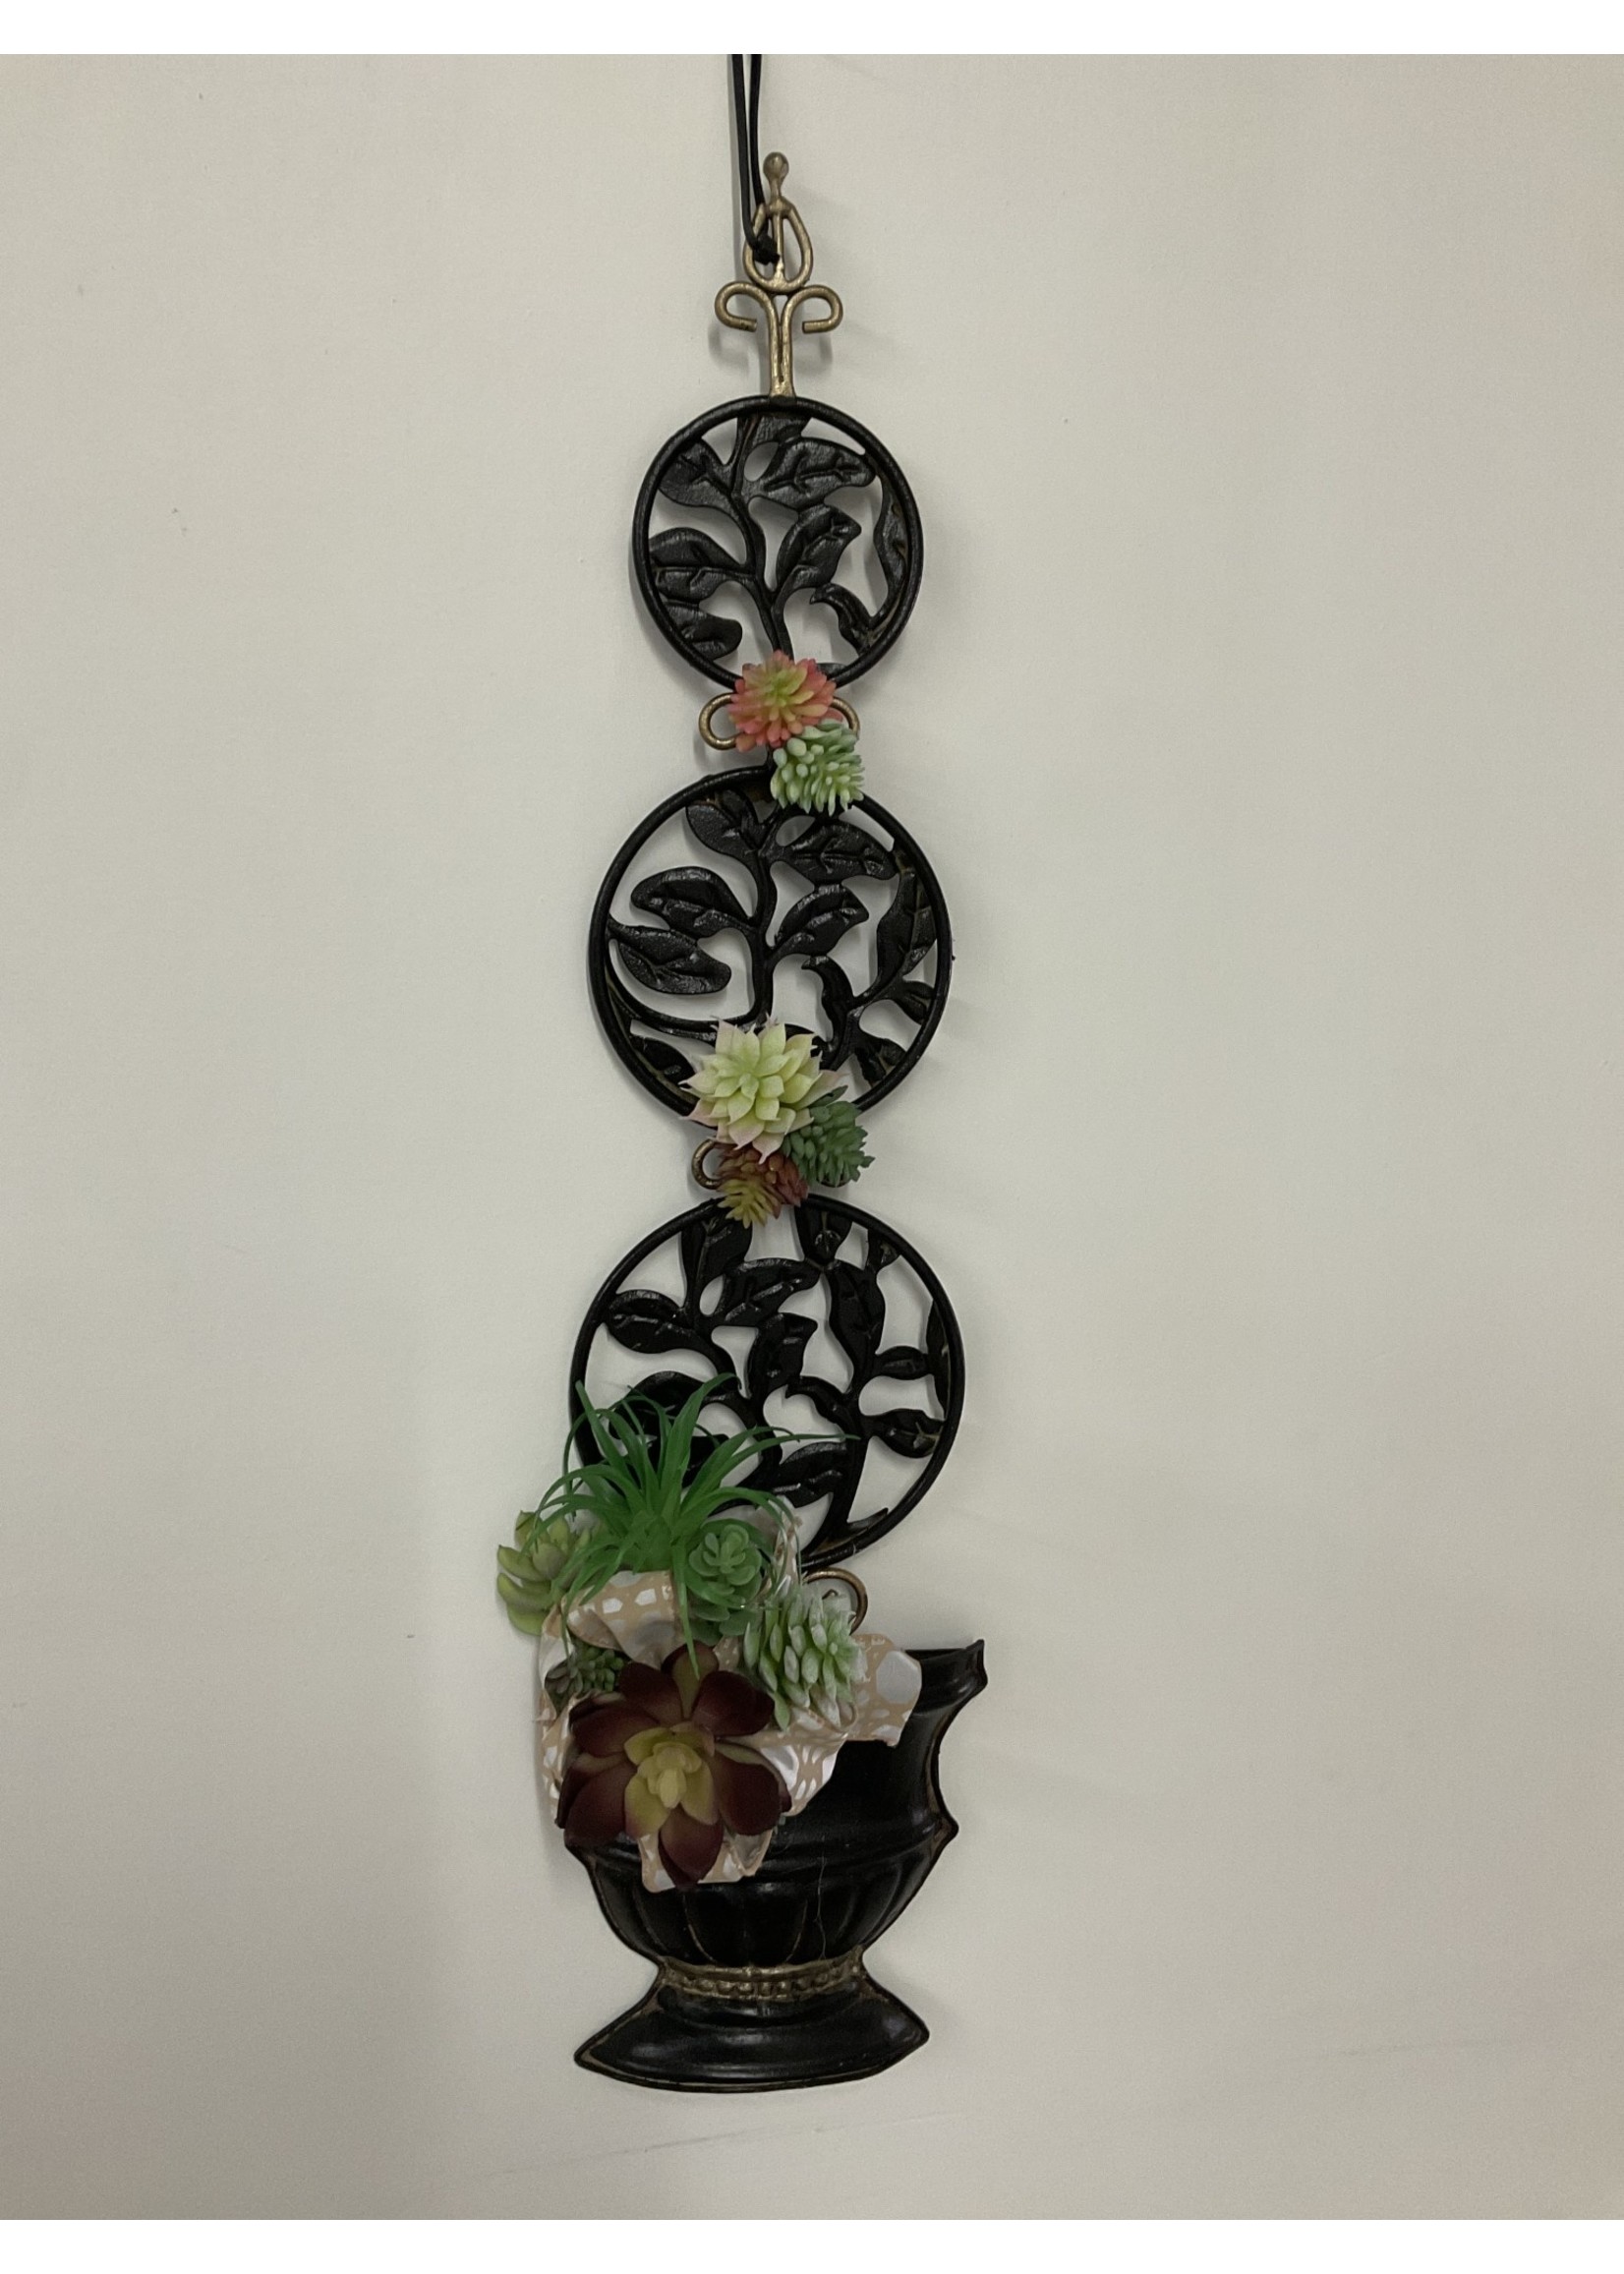 My New Favorite Thing Wall Hanging Black Metal Decor w/Succulents